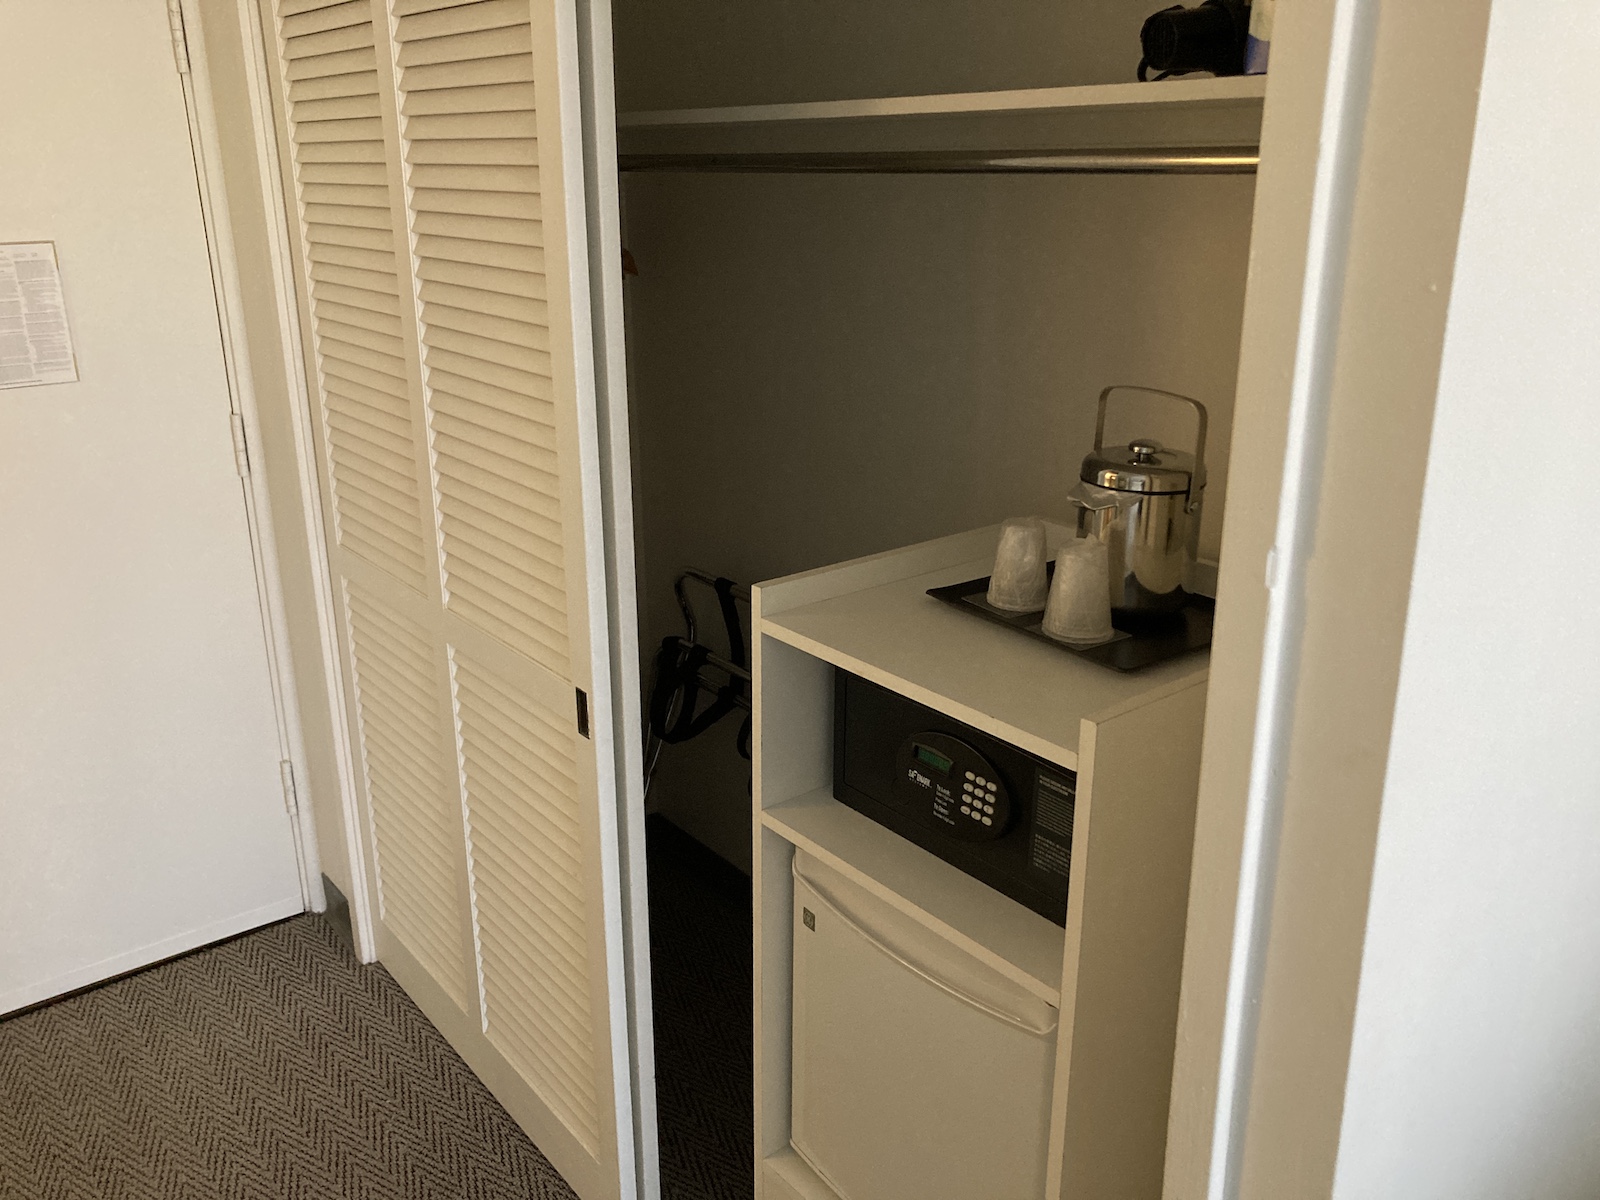 Image of closet with 1 door open, showing a safe and ironing board inside